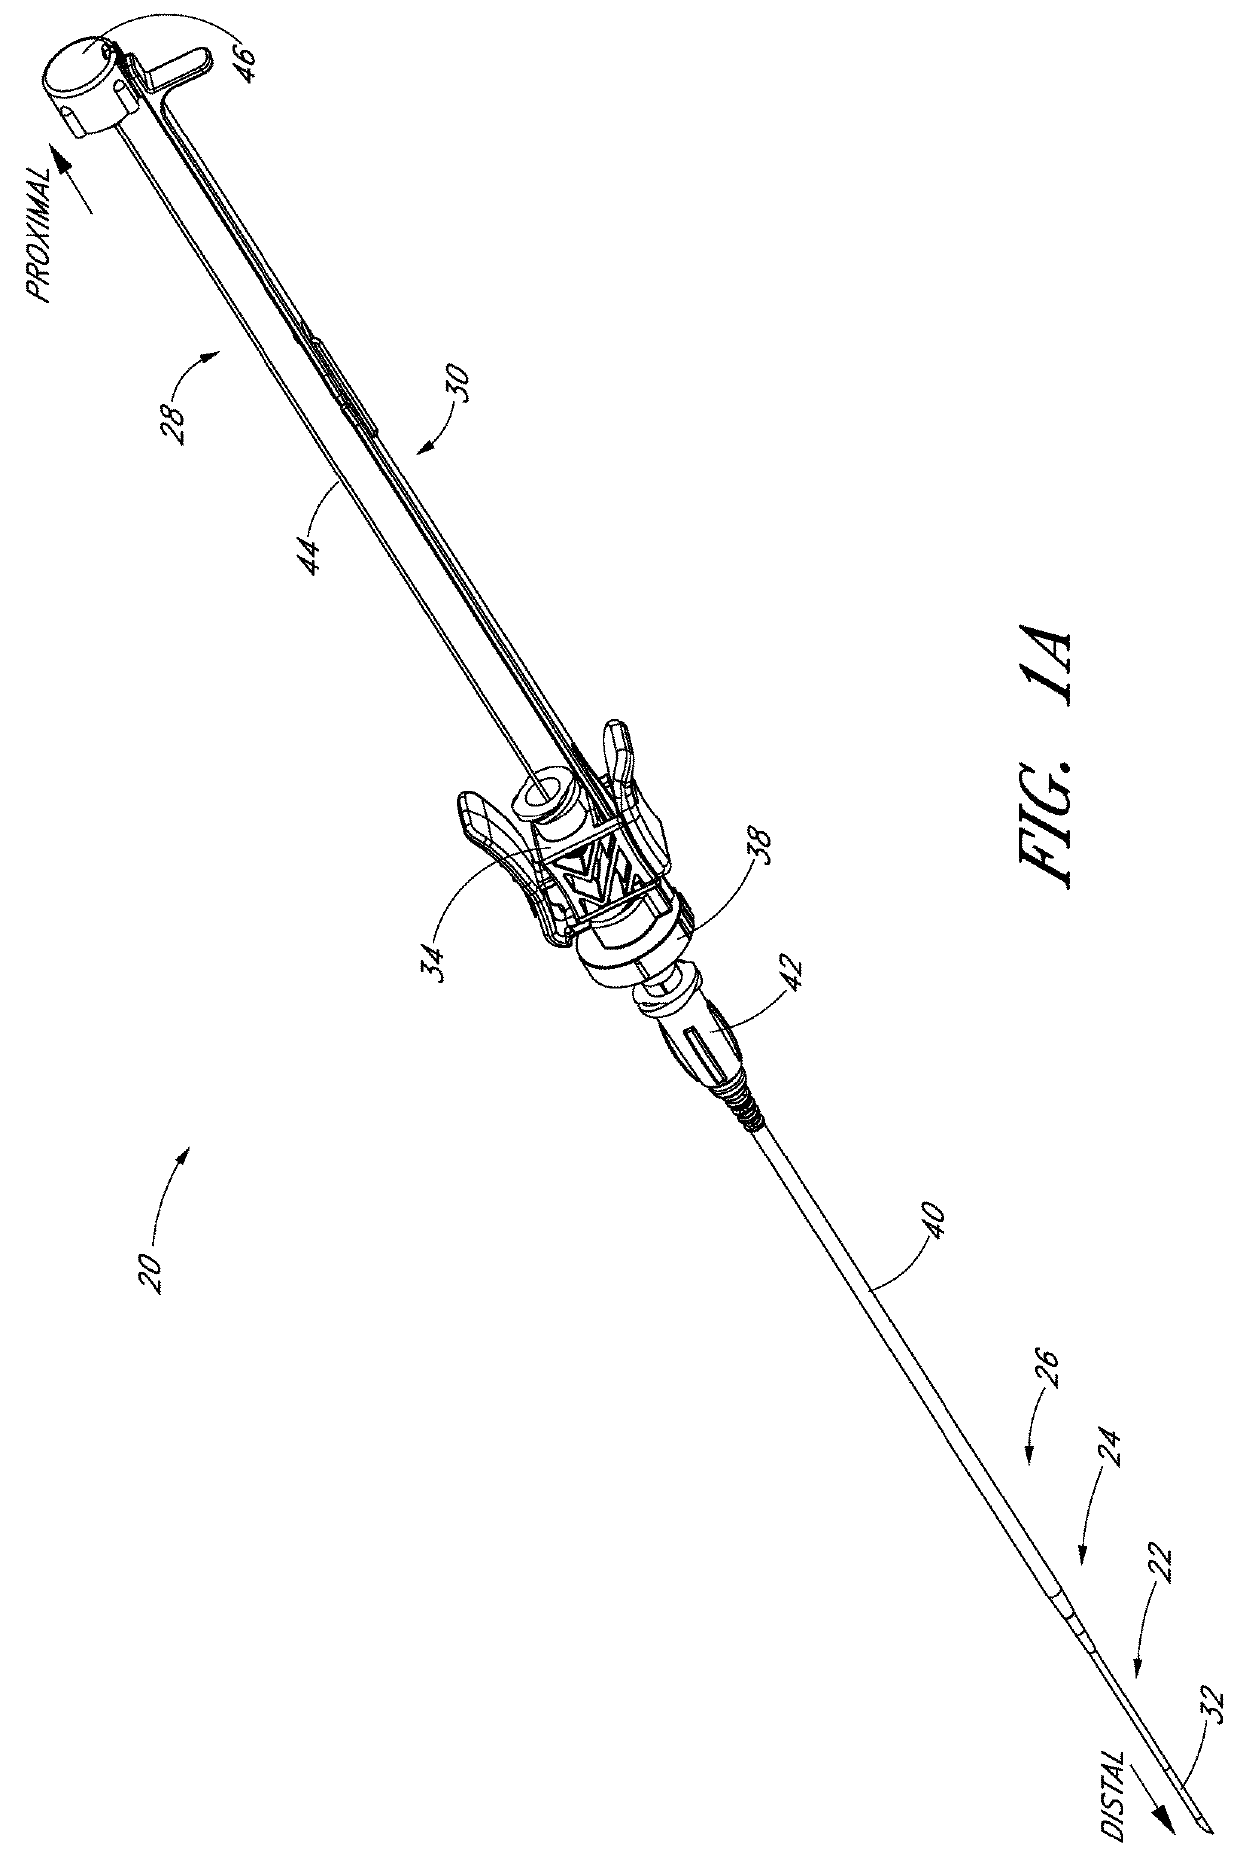 Flexible medical article and method of making the same